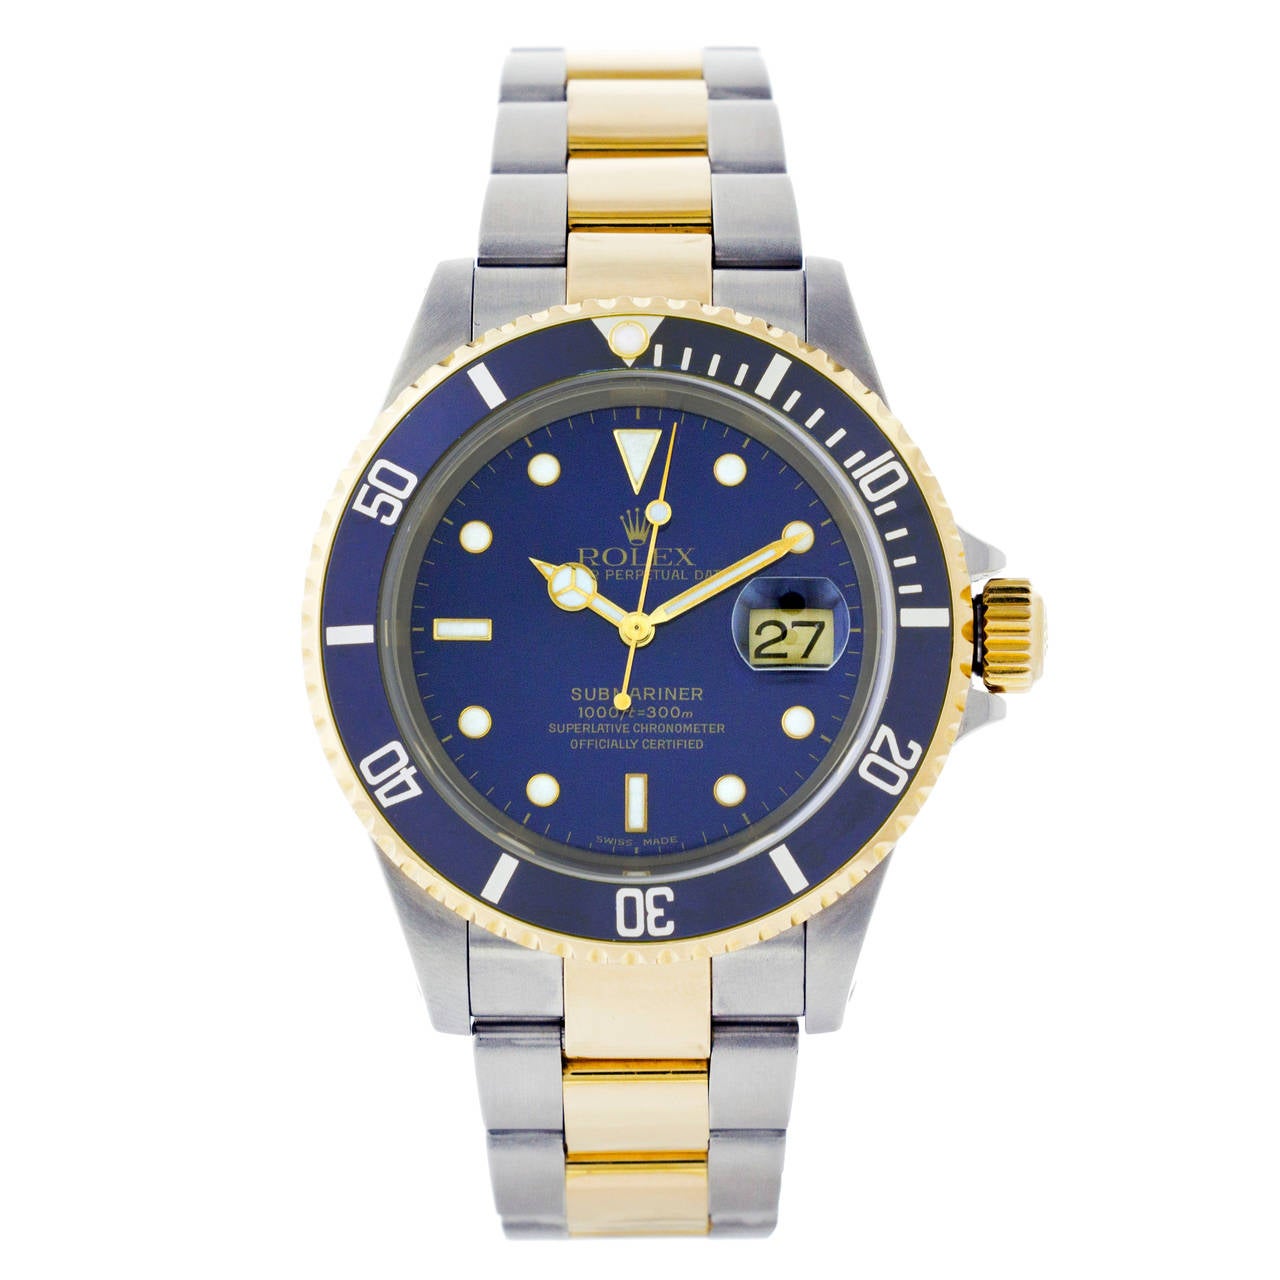 Rolex Stainless Steel Yellow Gold Submariner Automatic Wristwatch Ref 16613 For Sale